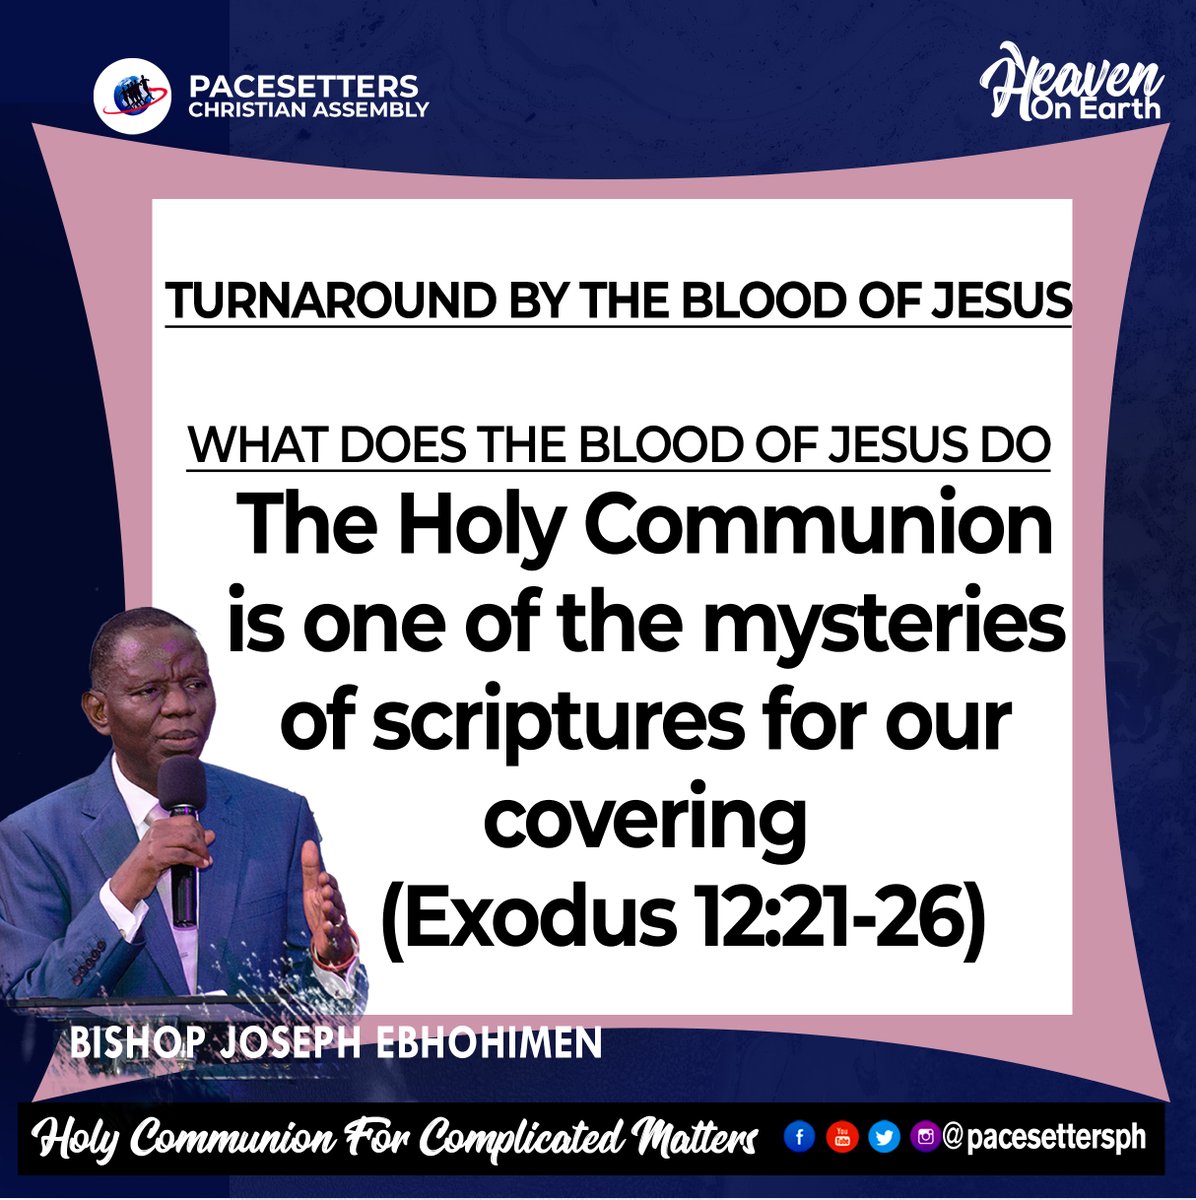 TURNAROUND BY THE BLOOD OF JESUS - WHAT DOES THE BLOOD OF JESUS DO?

#TurnaroundbythebloodofJesus
#WhatdoesthebloodofJesusdo
#Holycommunionforcomplicatedmatters
#EndofmonththanksgivingService
#Plantedbythewaters
#Heavenonearth
#Pacesettersph